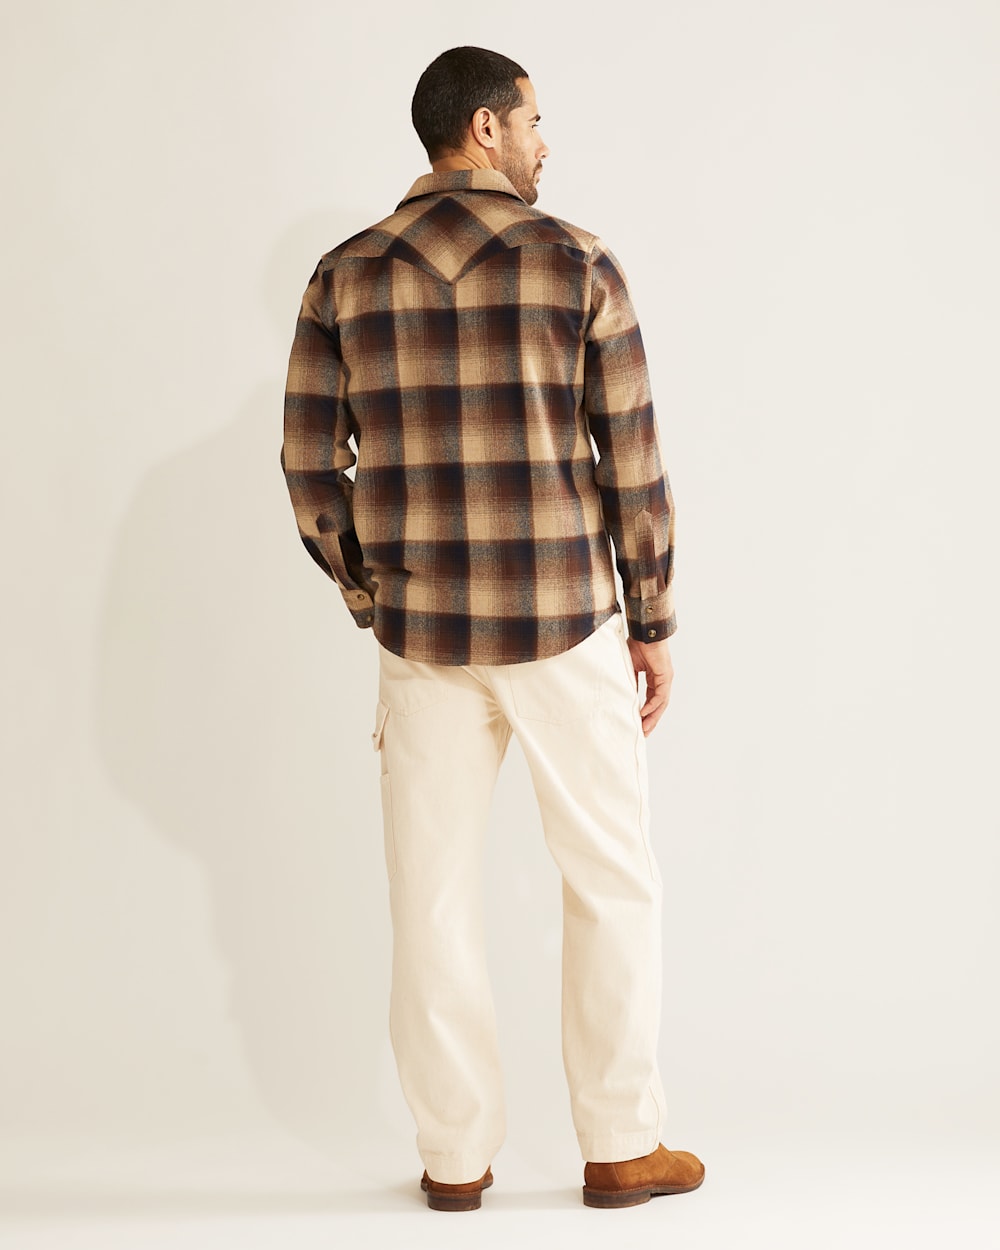 ALTERNATE VIEW OF MEN'S PLAID SNAP-FRONT WESTERN CANYON SHIRT IN BROWN/NAVY OMBRE image number 3